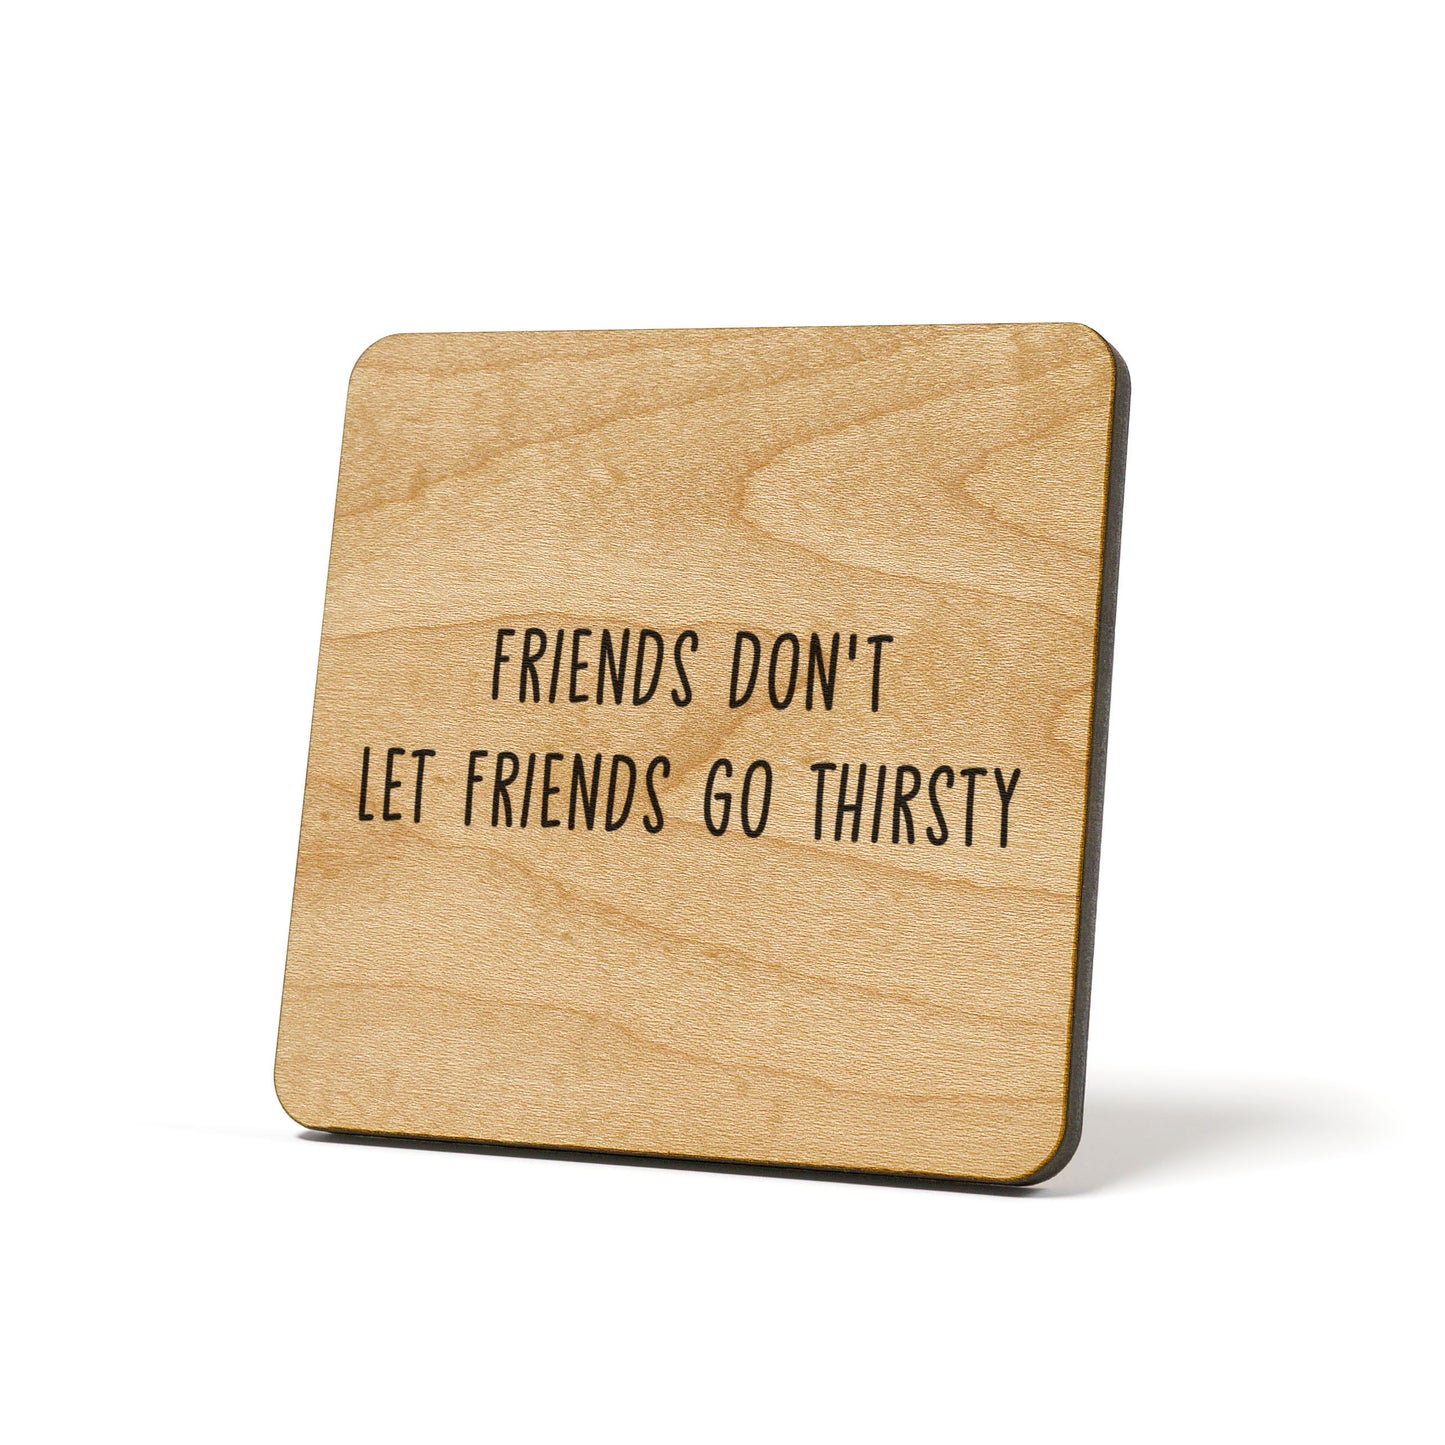 Friends Don't Let Friends Go Thirsty Quote Coaster